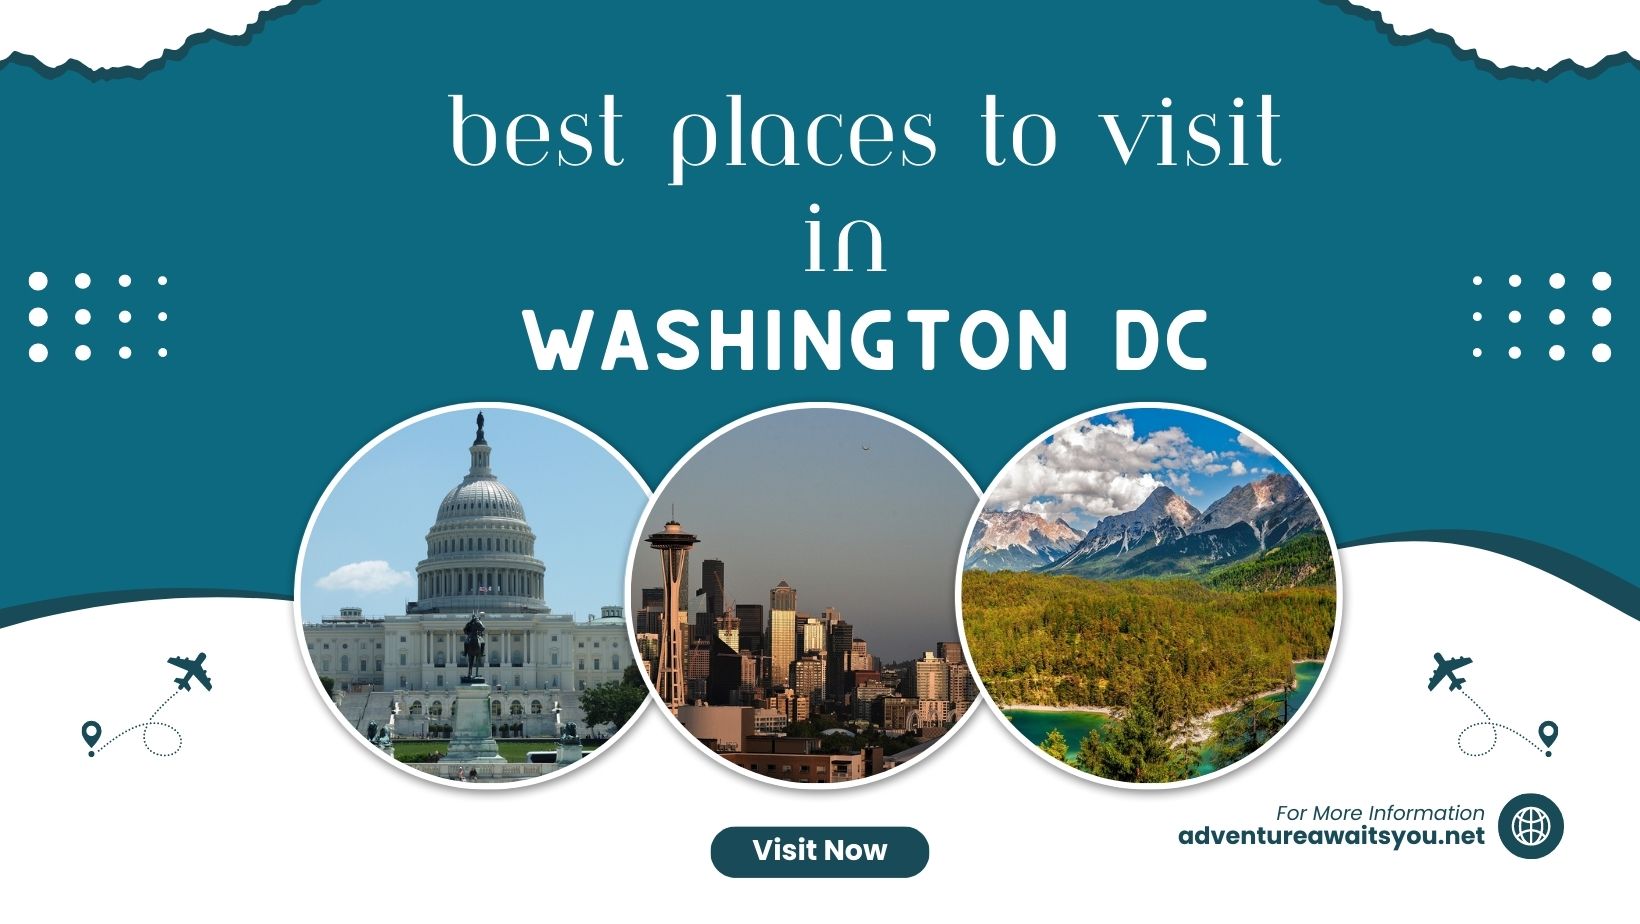 BEST PLACES TO VISIT IN WASHINGTON